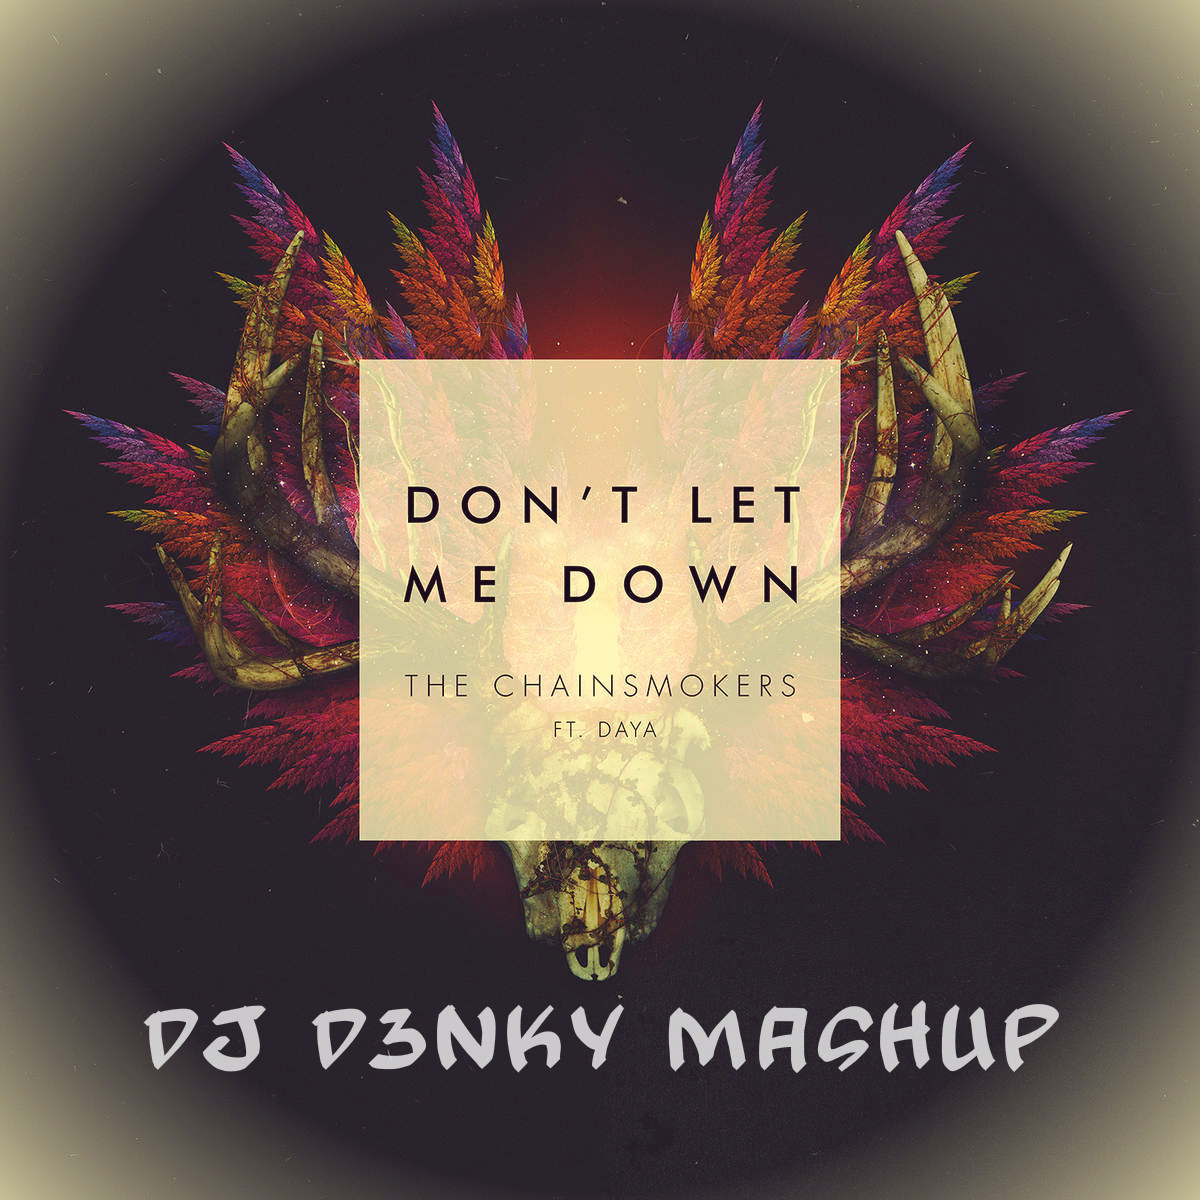 The Chainsmokers feat. Daya. Daya don't Let me down. The Chainsmokers feat Cheyenne Giles - make me feel. The Chainsmokers feat Cheyenne Giles - make me feel Cover 1000x1000. The chainsmokers feat daya don t